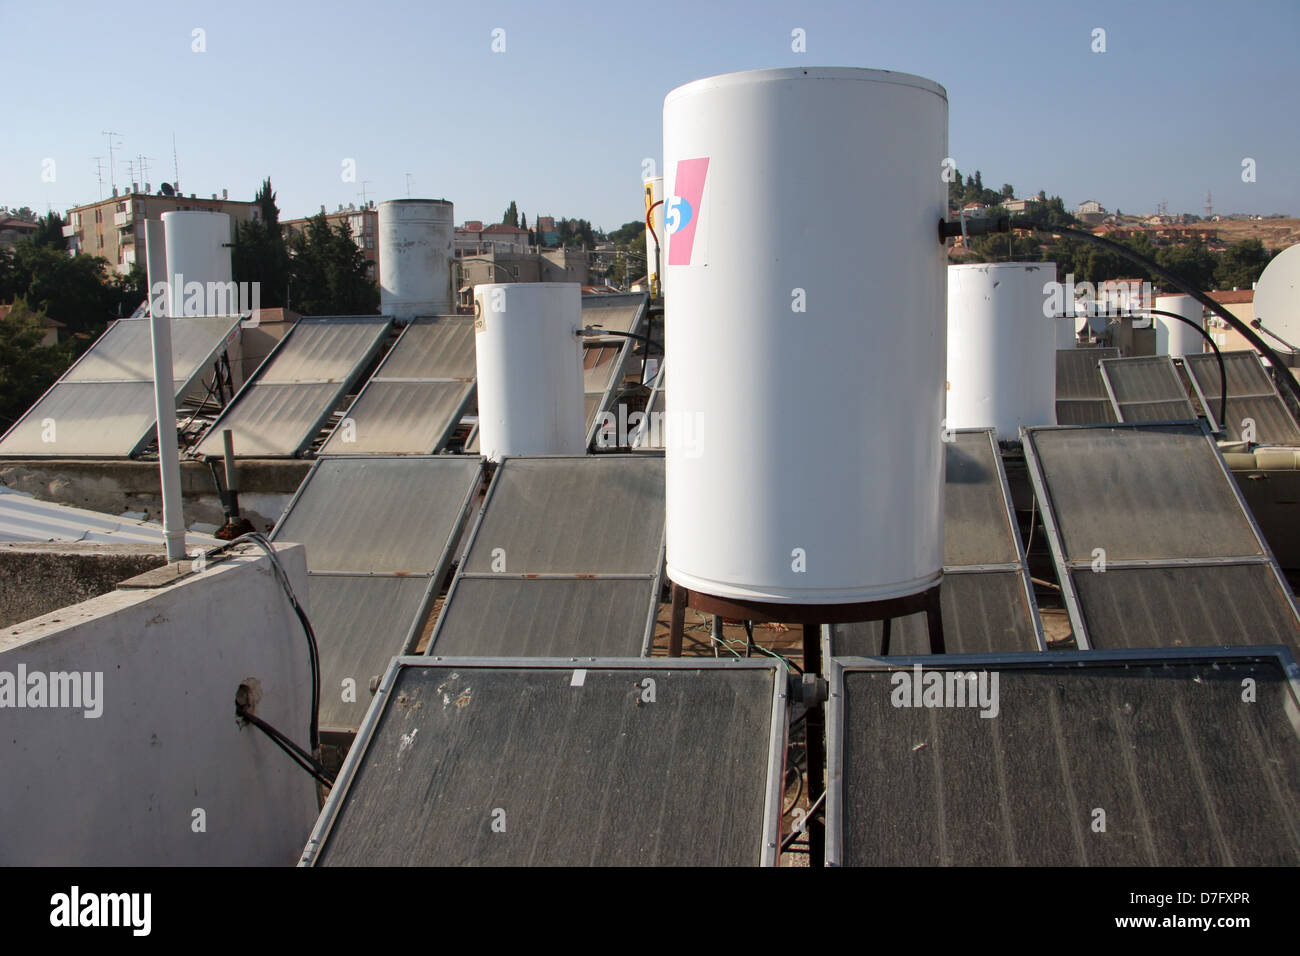 solar water heaters in safed Stock Photo